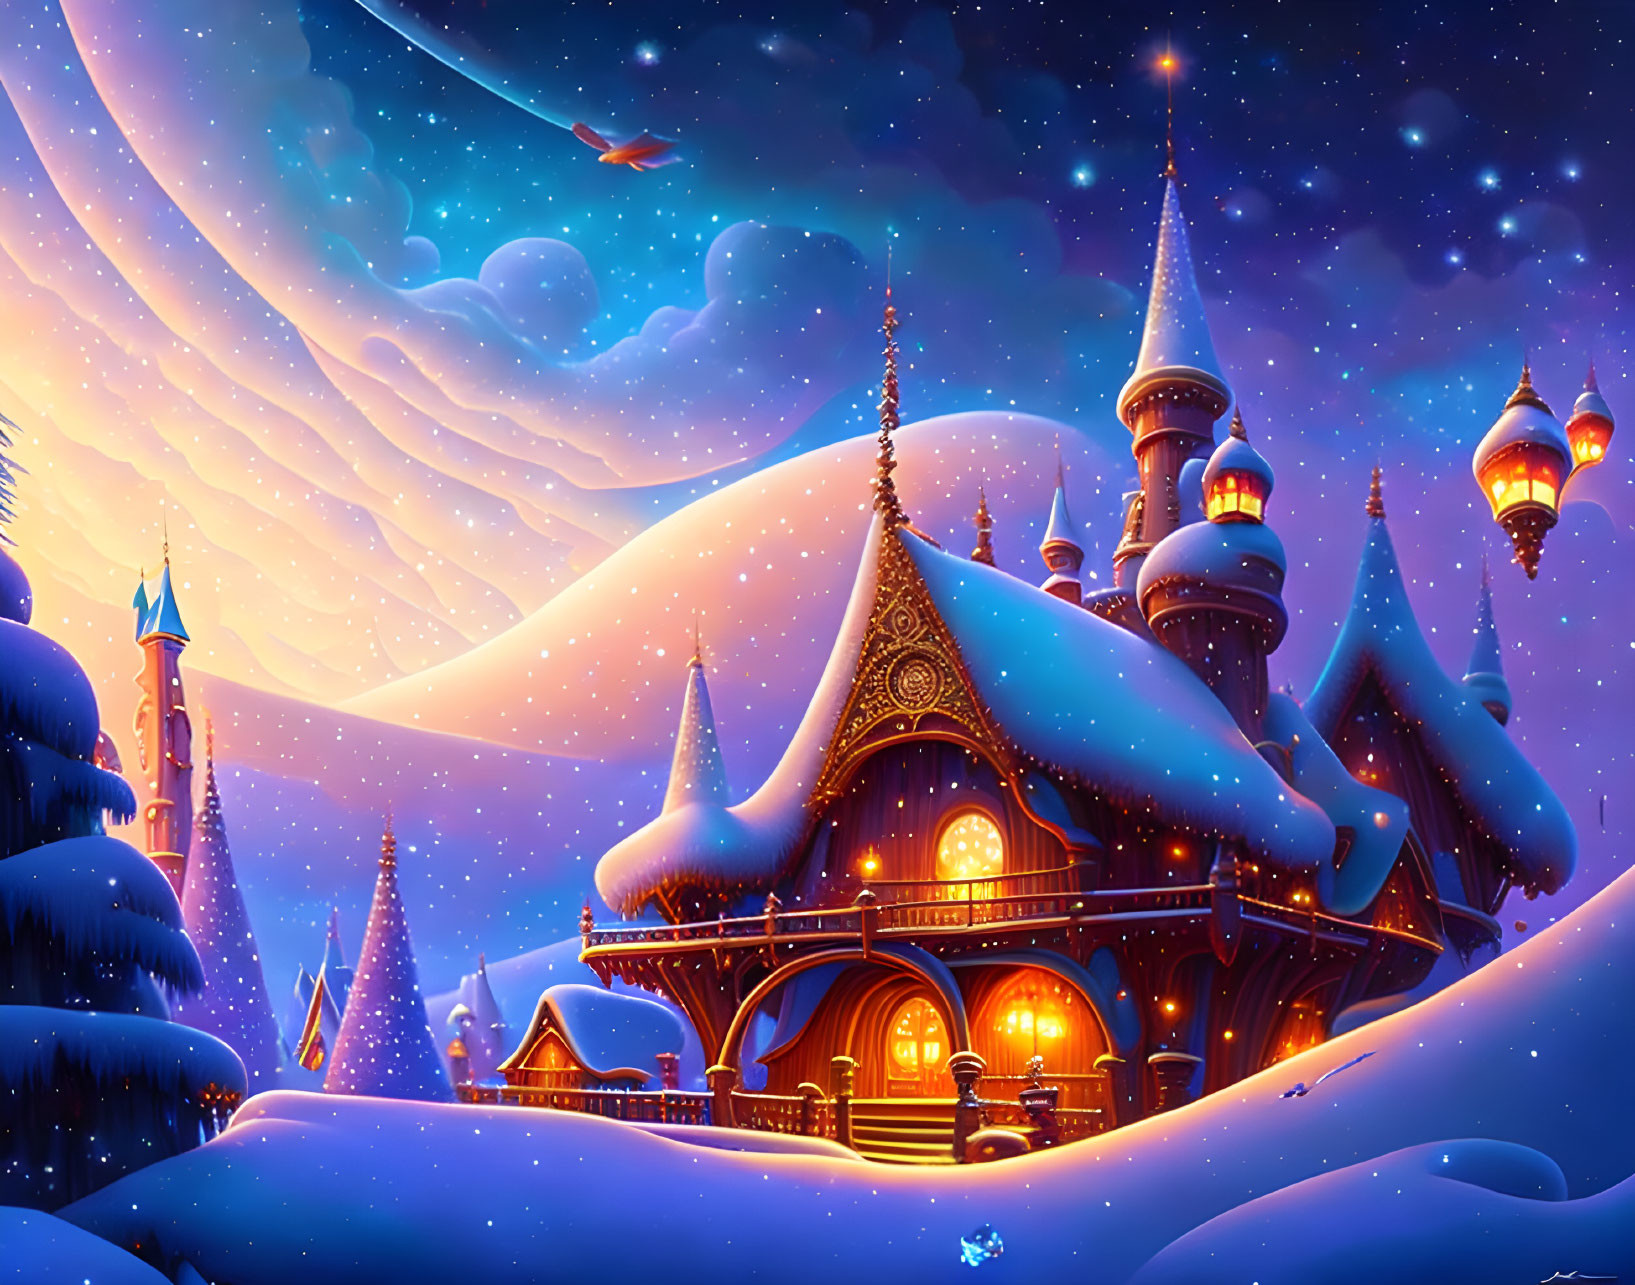 Snow-covered fantasy castle at night with glowing windows